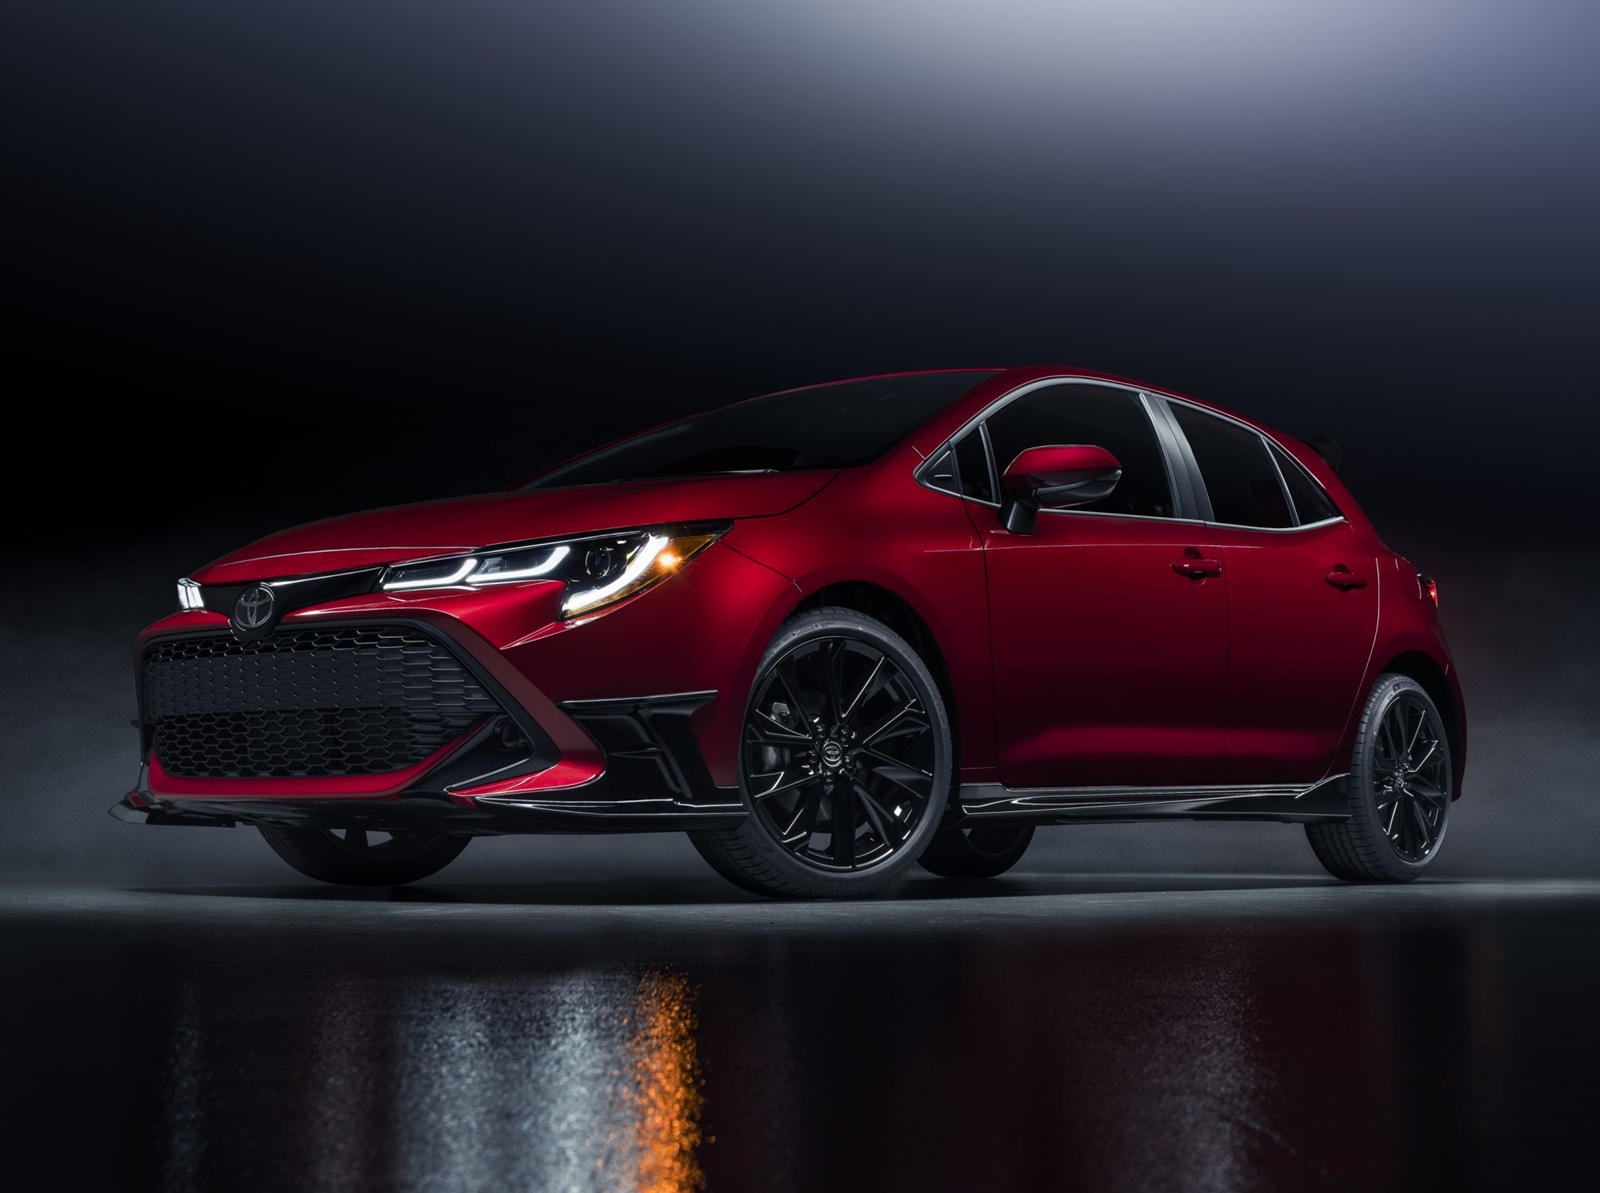 2021 Toyota Corolla Hatchback Special Edition Looks Brilliant | CarBuzz